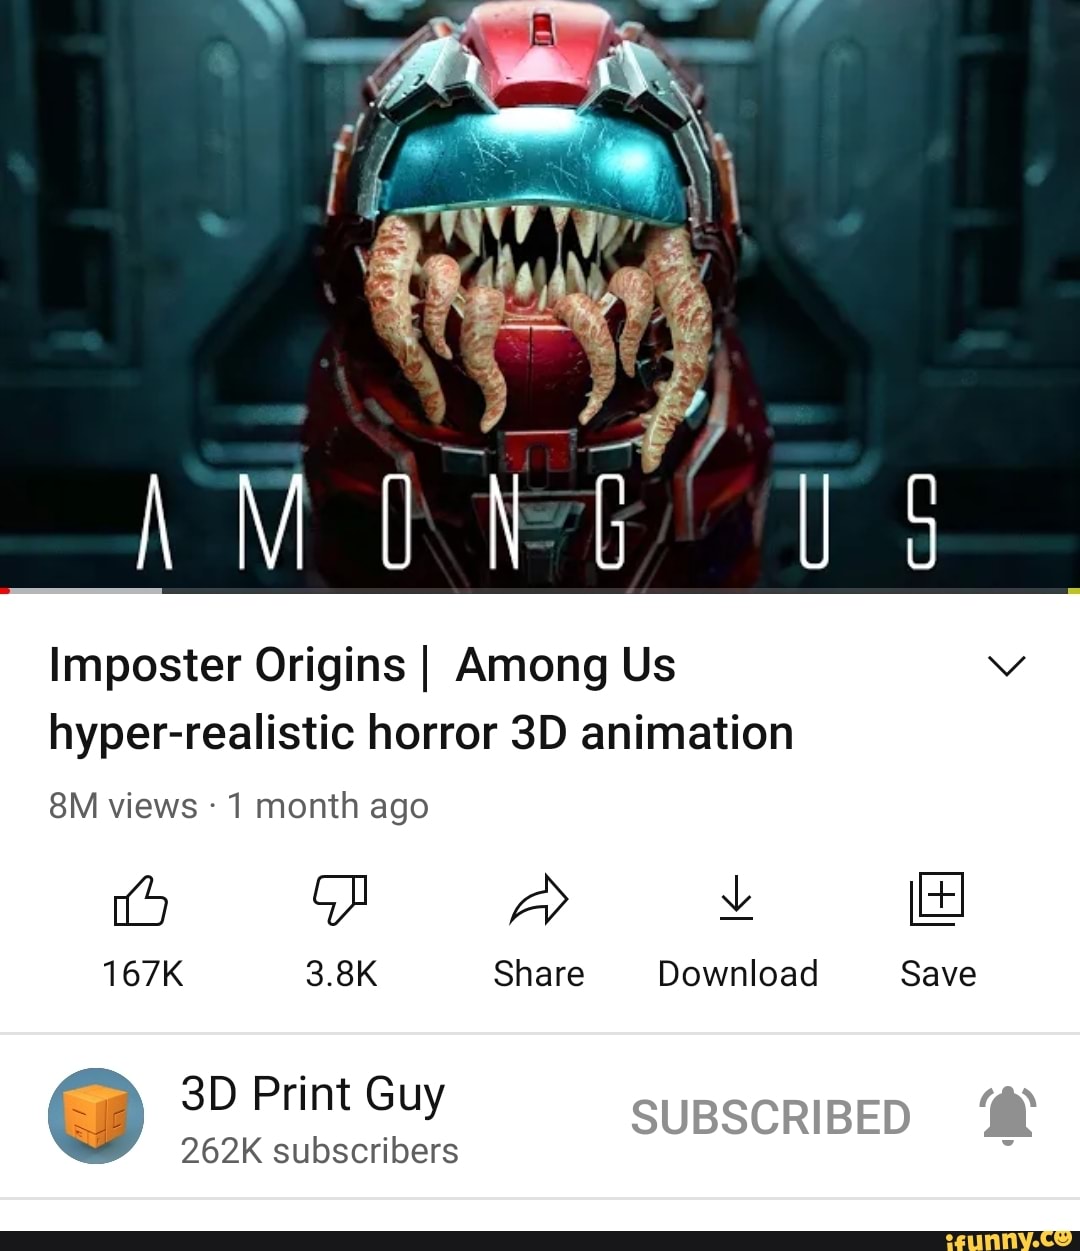 AM Imposter Origins I Among Us hyper-realistic horror animation views - 1  month ago (5 A 167K  Share Download Save Print 262K Guy SUBSCRIBED 262K  subscribers 